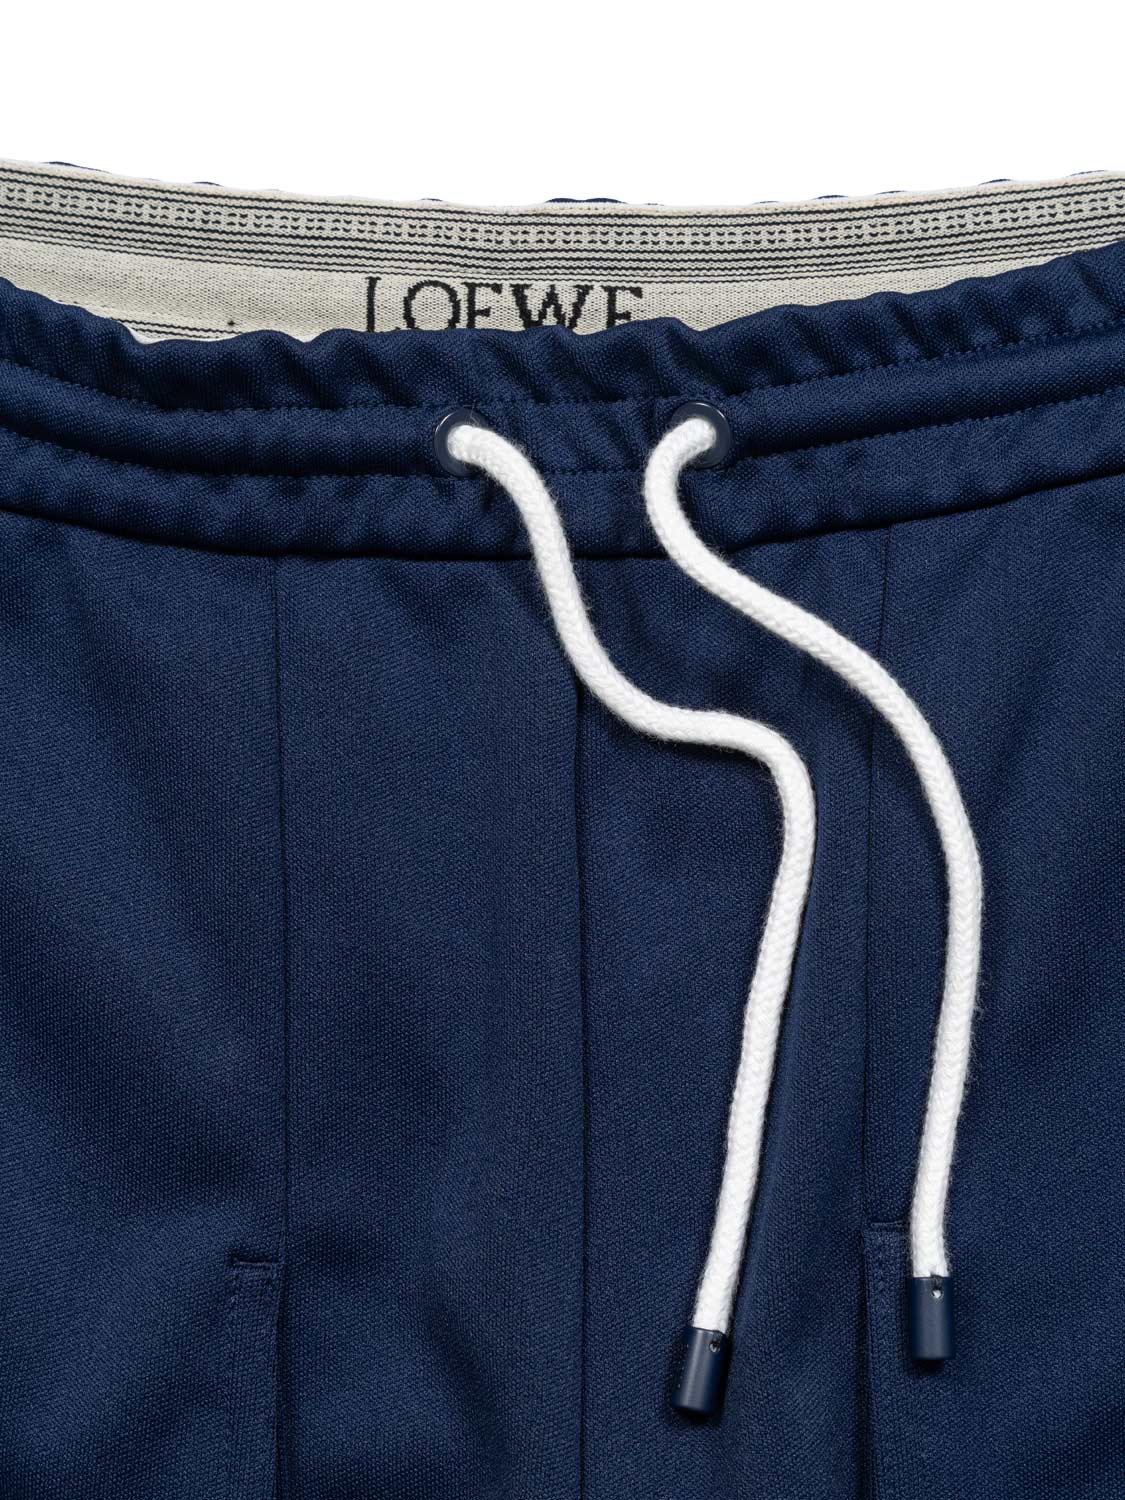 Cargo Tracksuit Trousers